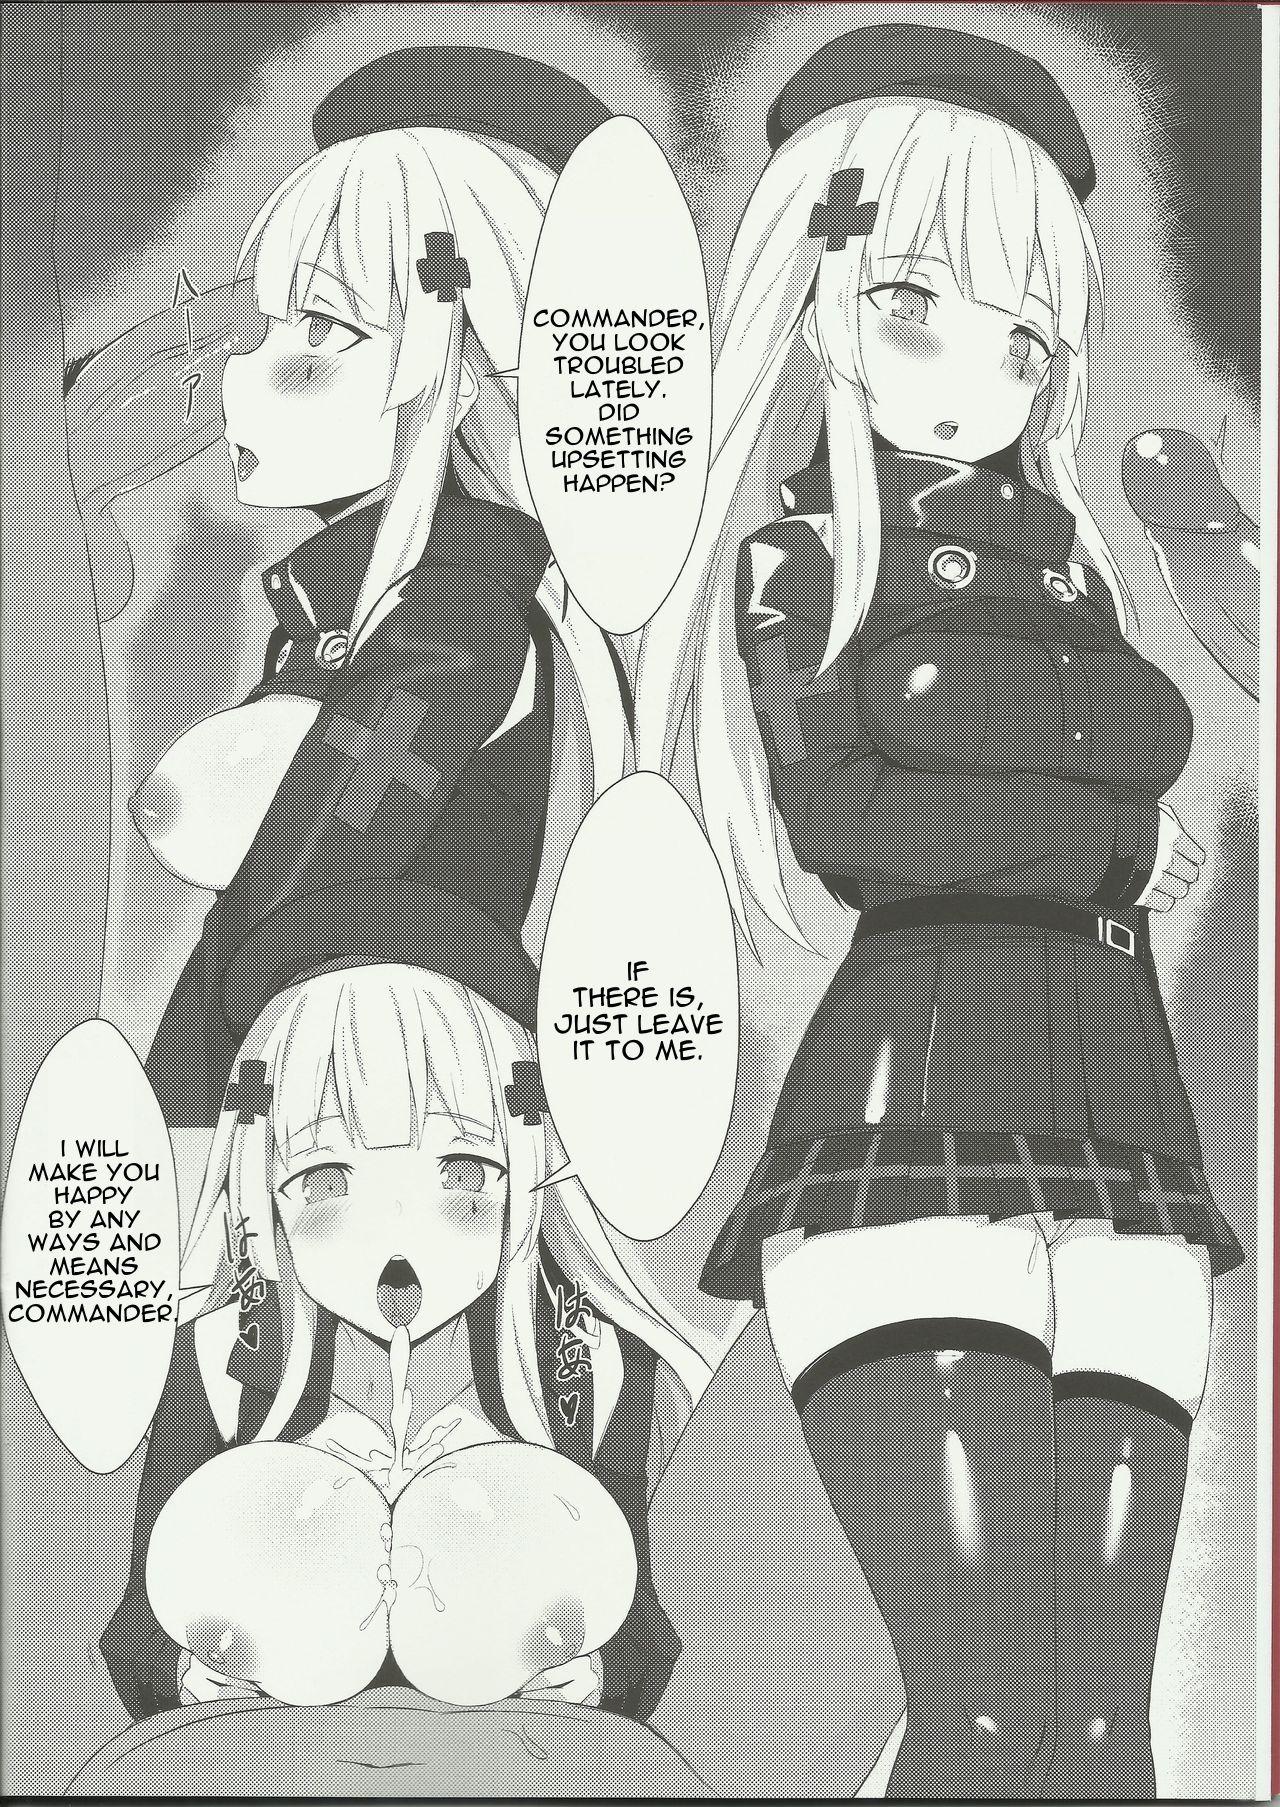 Swallow 404 - Girls frontline Parody - Page 3